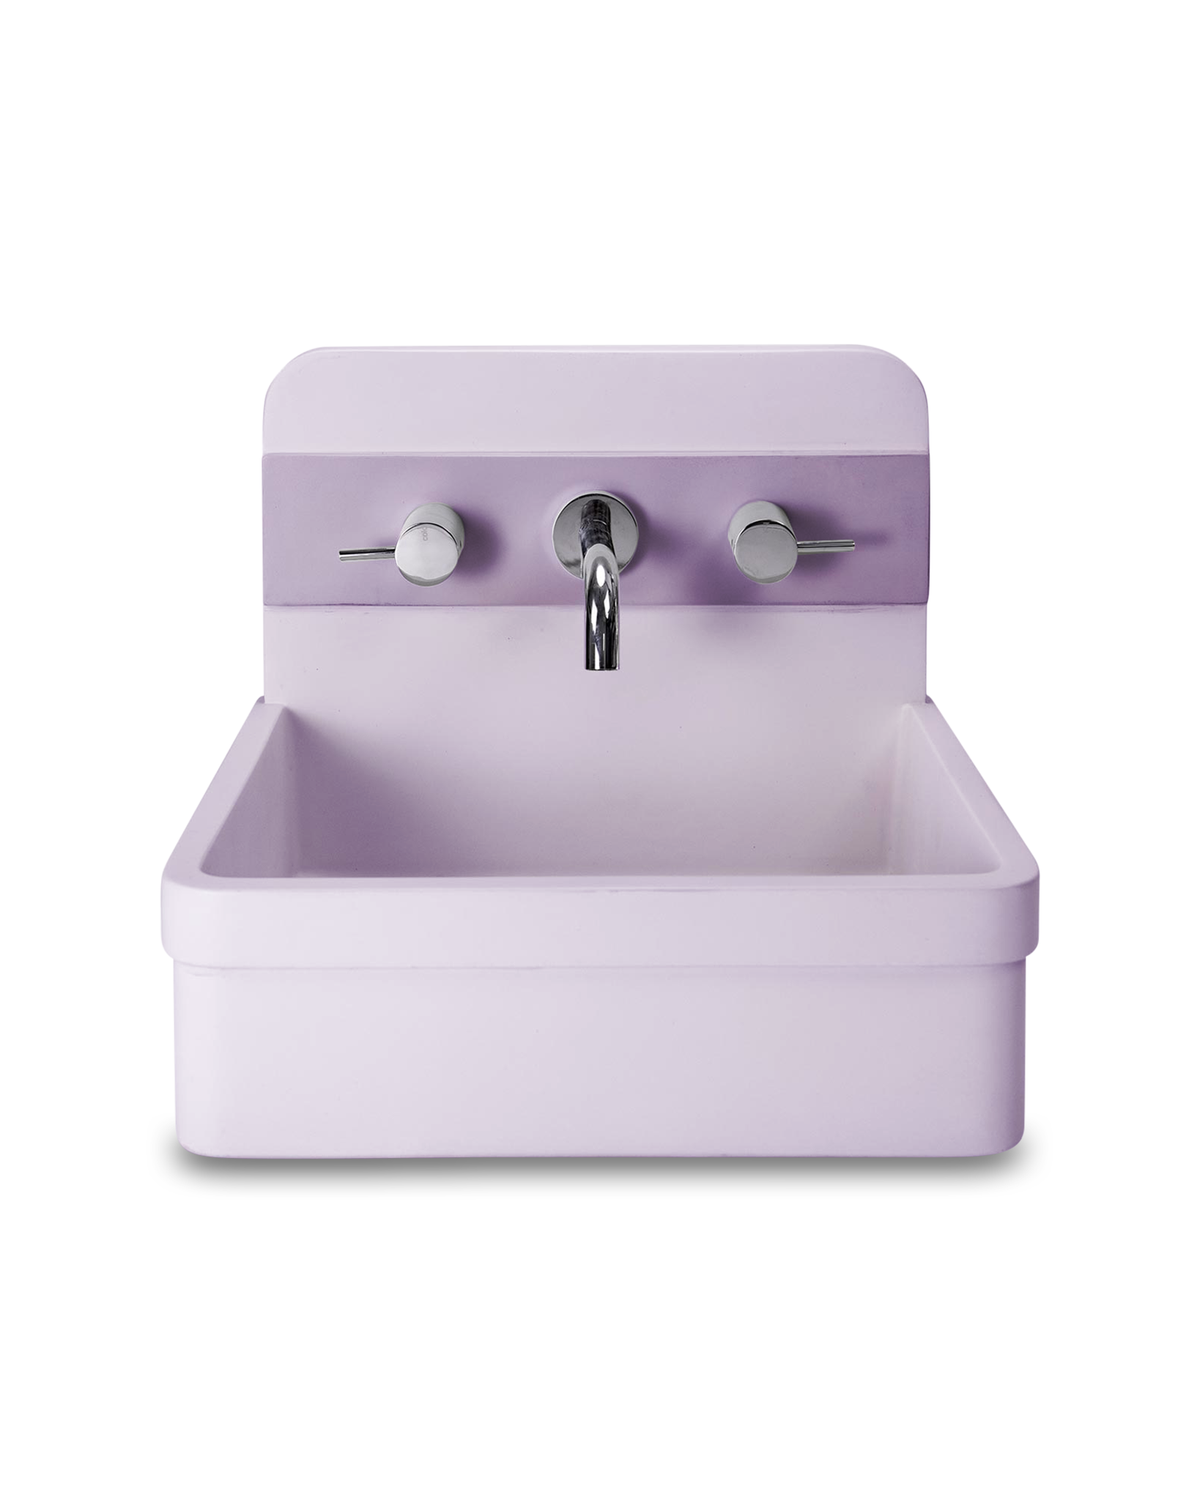 Herbert Basin - Two Tone - Surface Mount (Lilac)